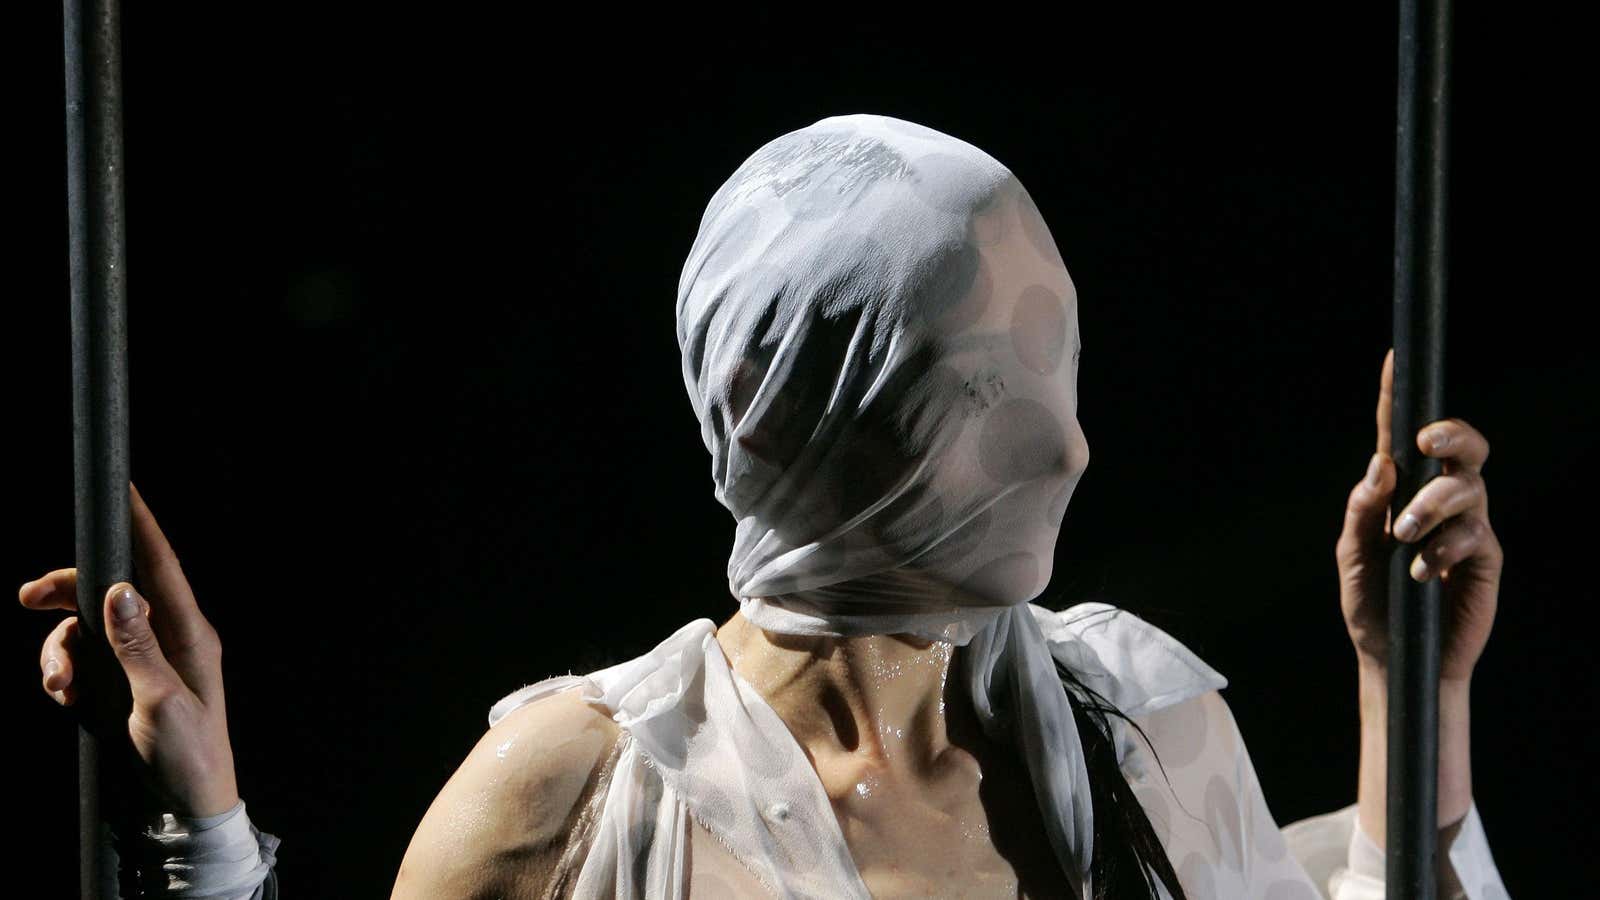 Margiela, who was known for shunning publicity, often covered the faces of his models.